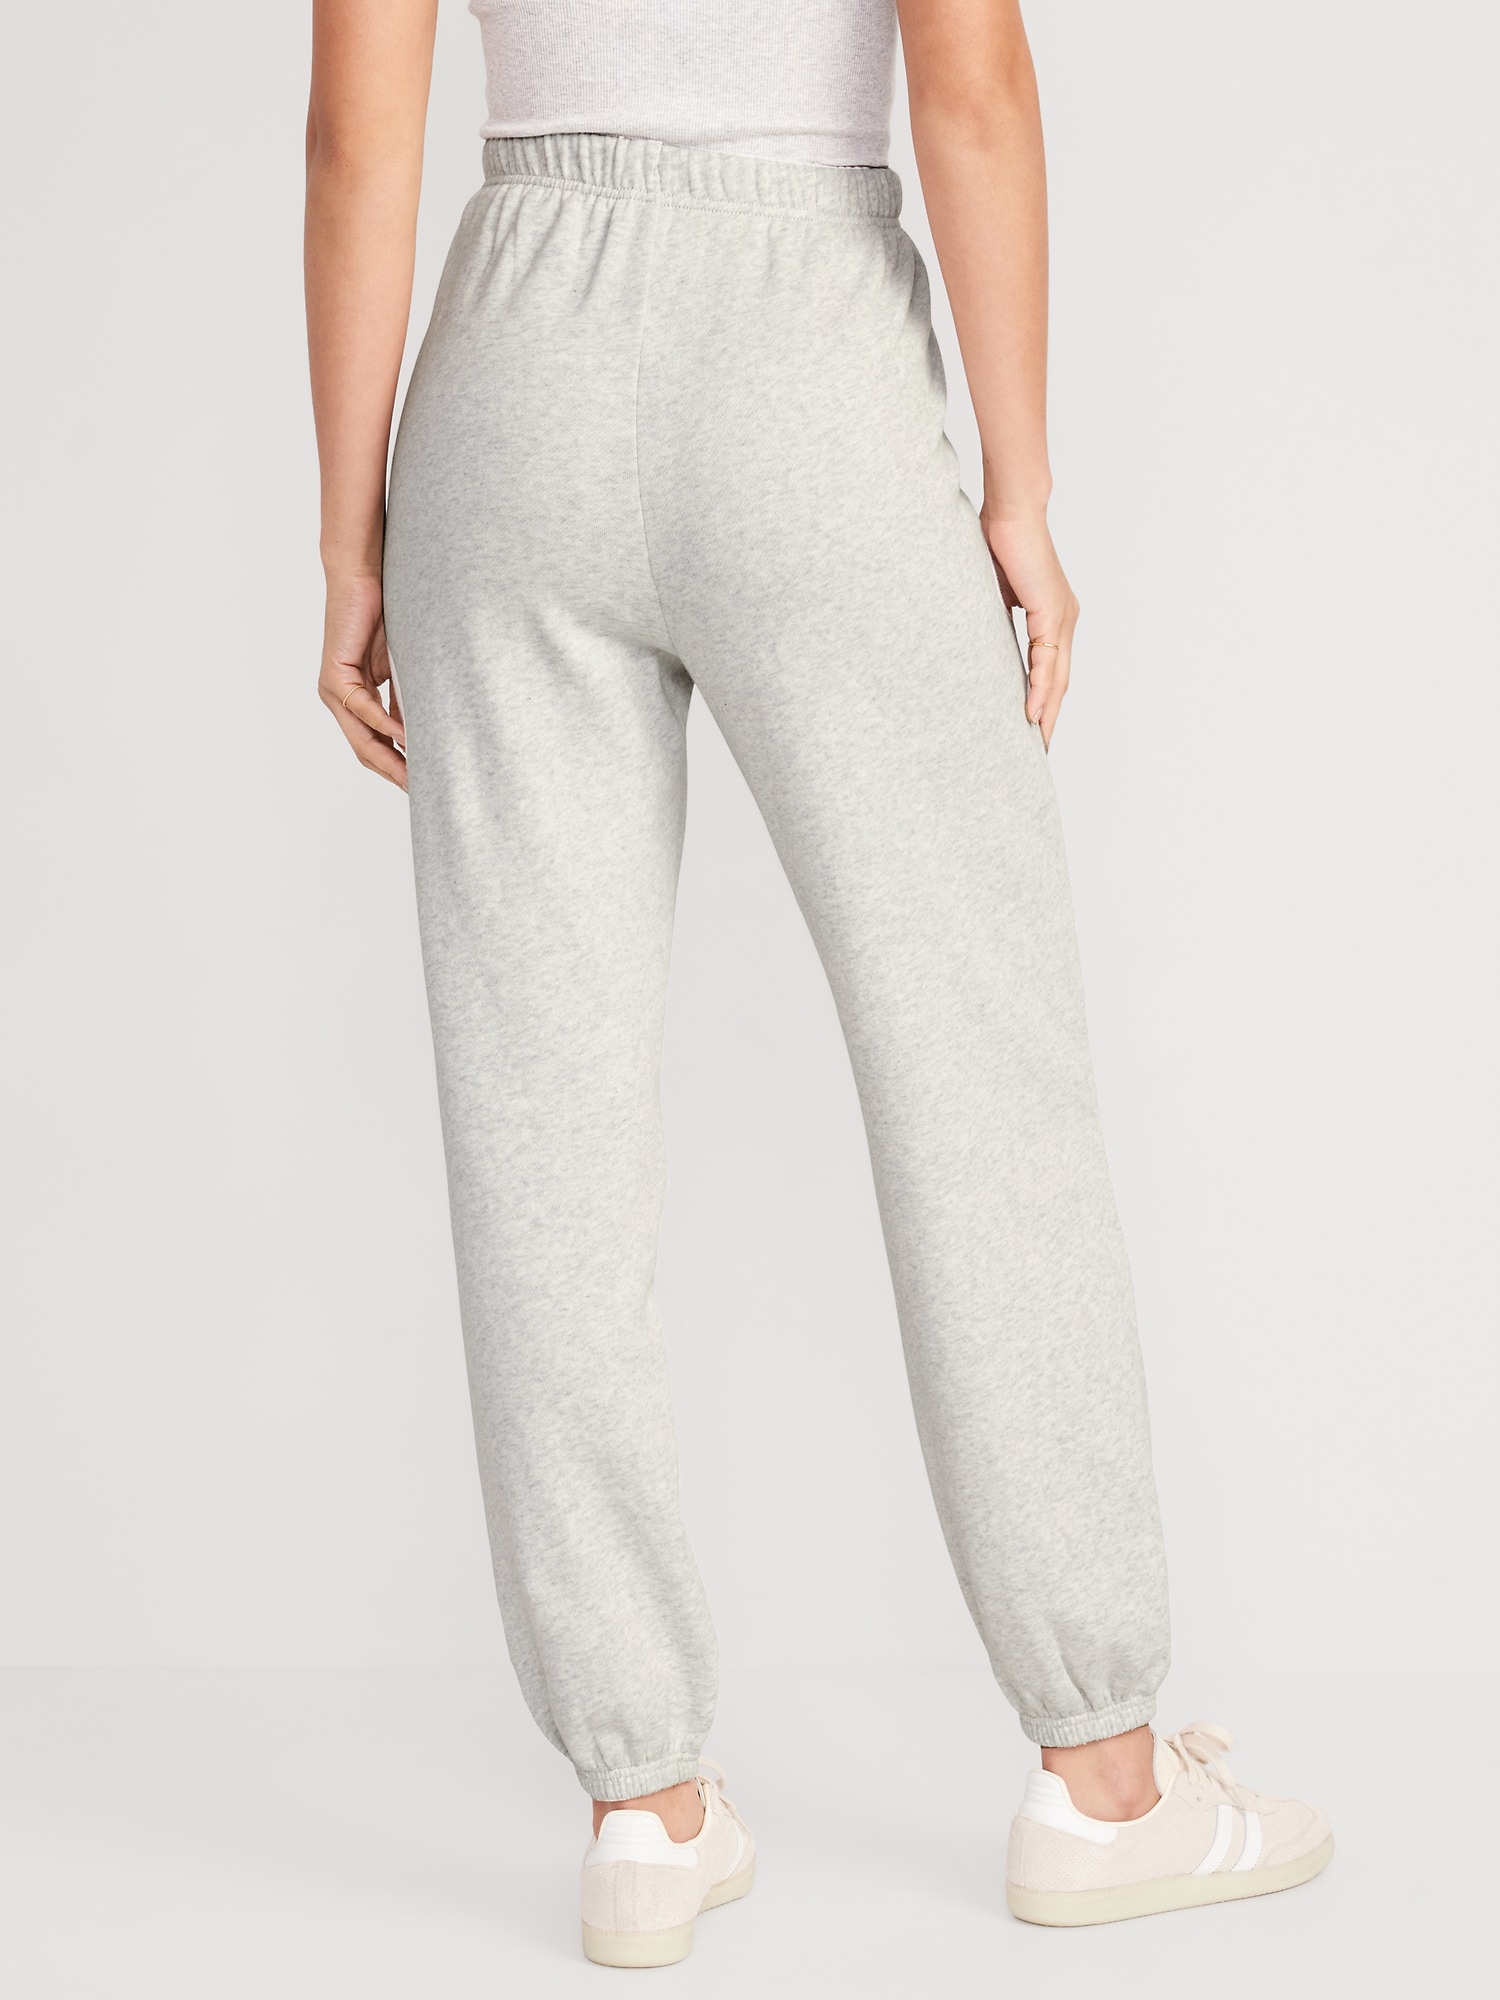 ZUTY Joggers for Women High Waisted Women Sweatpants with Pockets